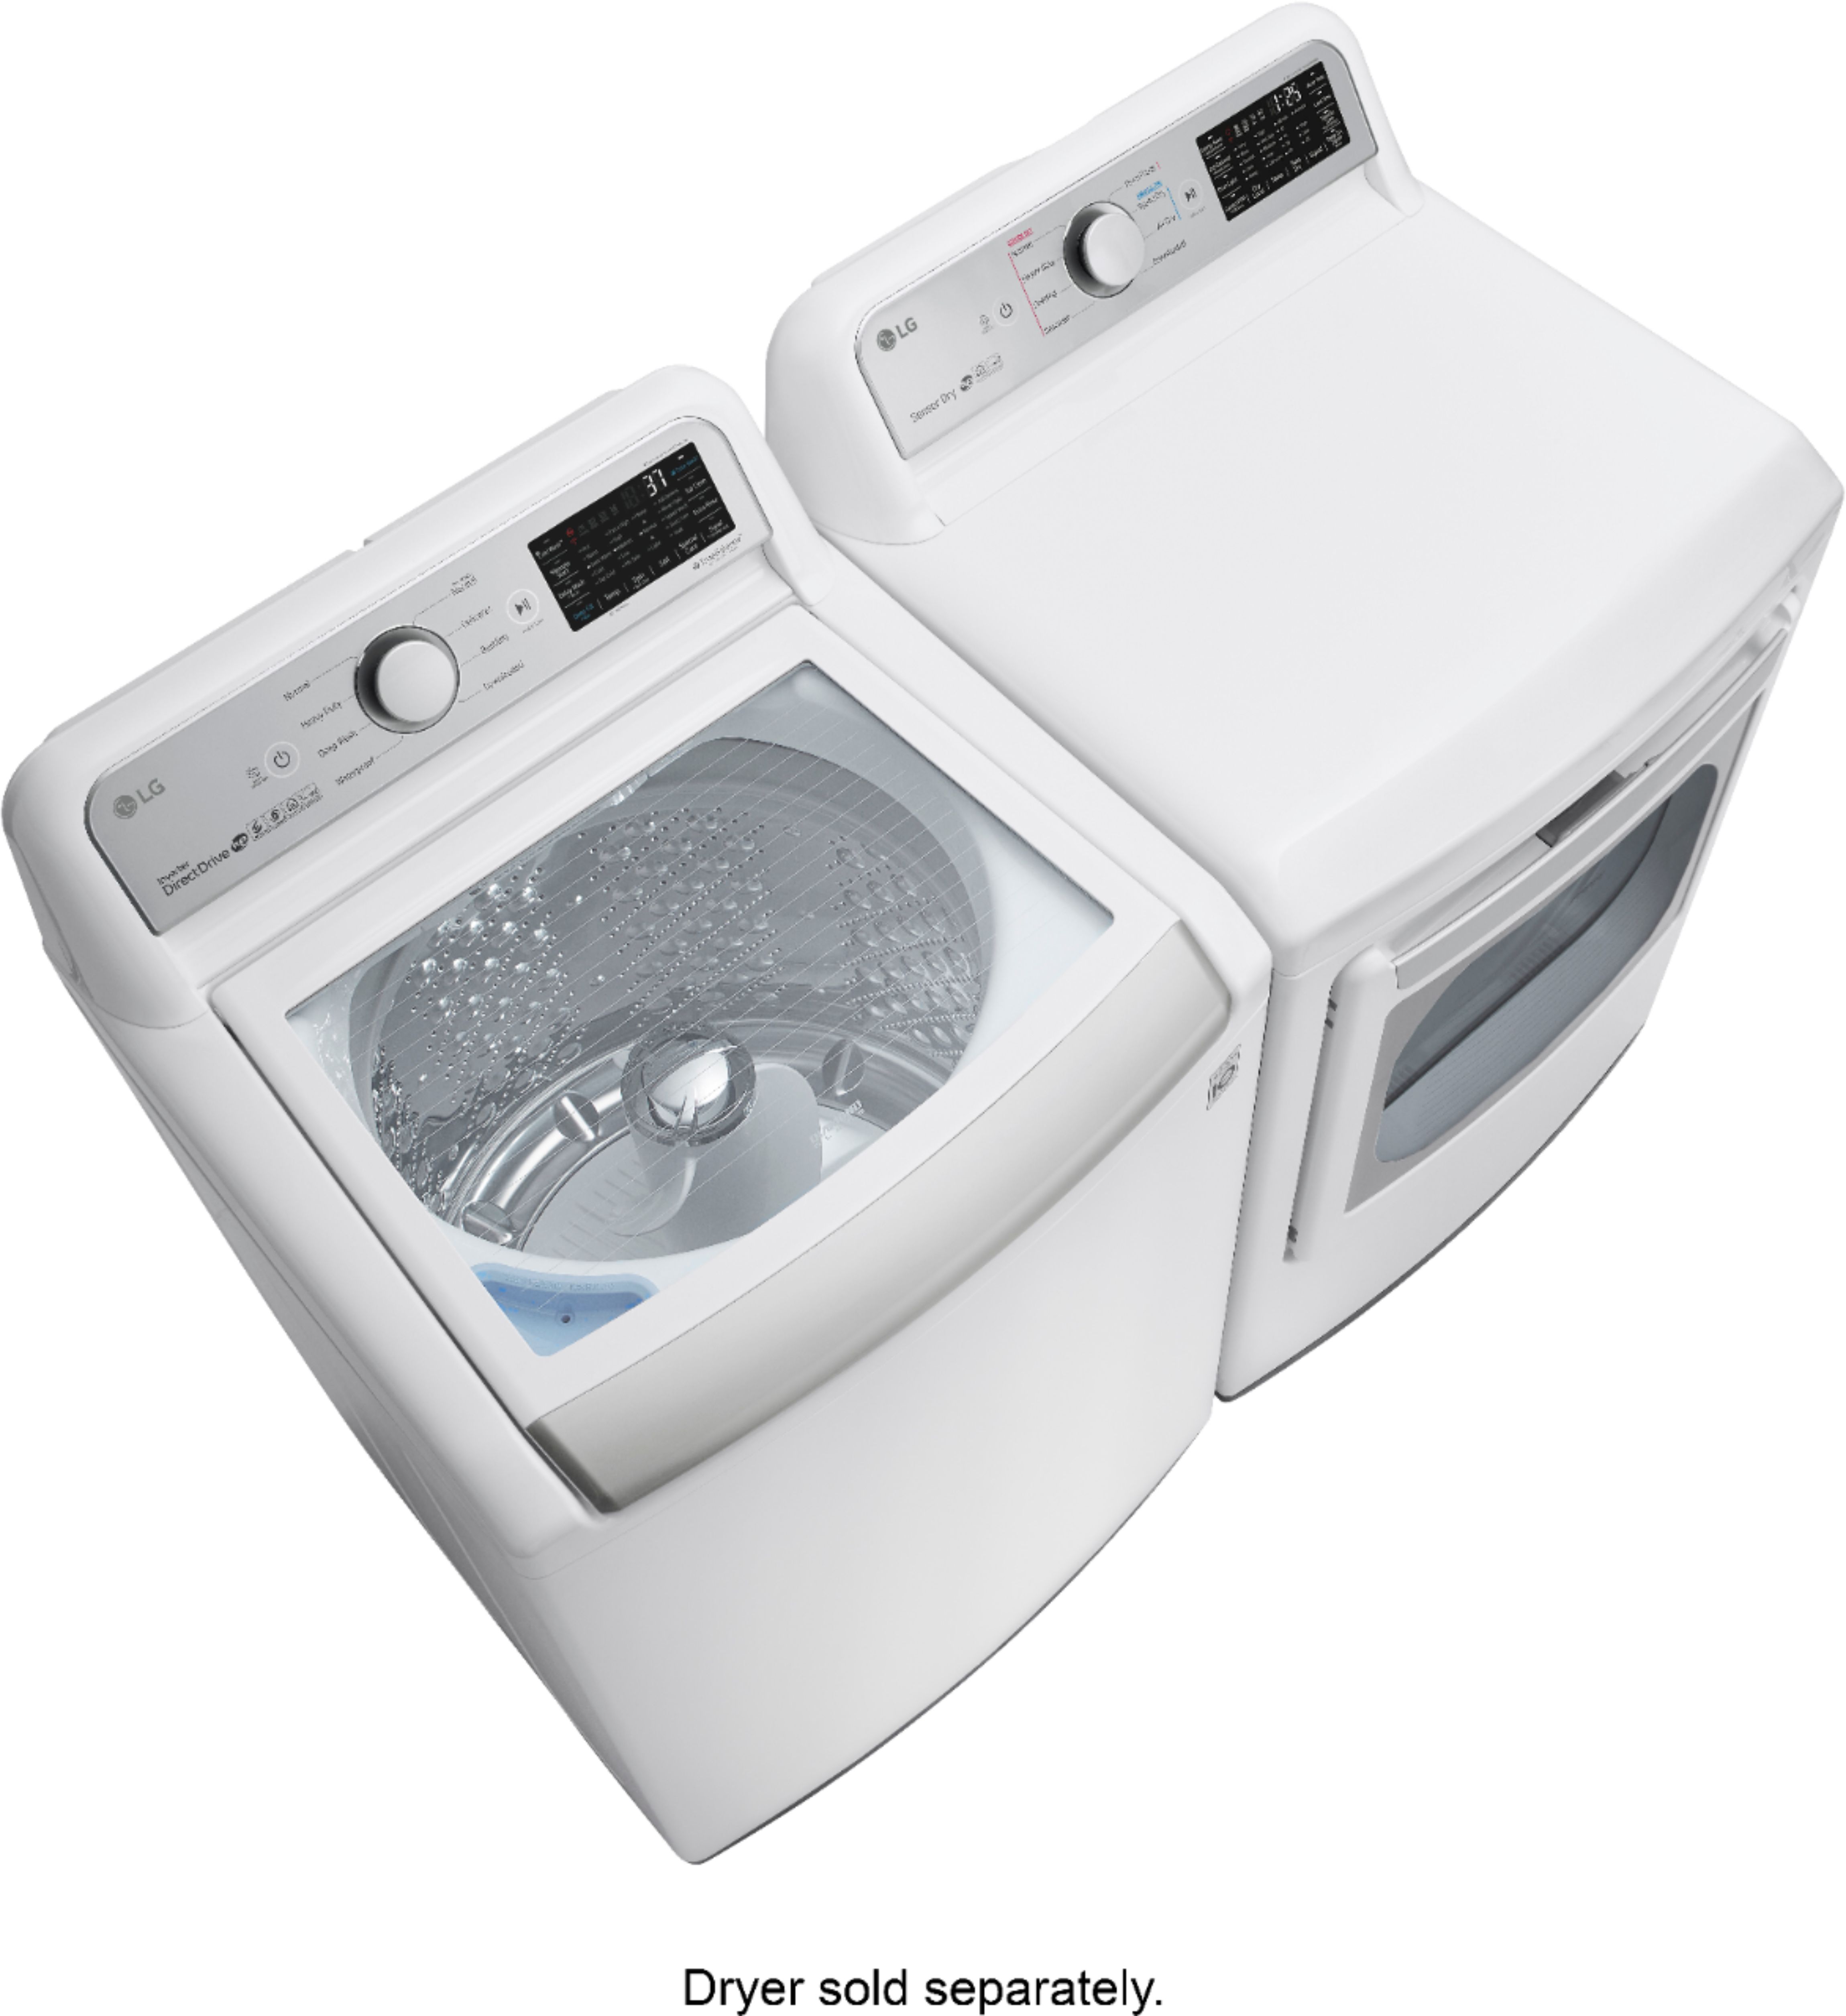 LG 27 in. 4.1 cu. ft. Top Load Washer with 4Way Agitator, Slam Proof